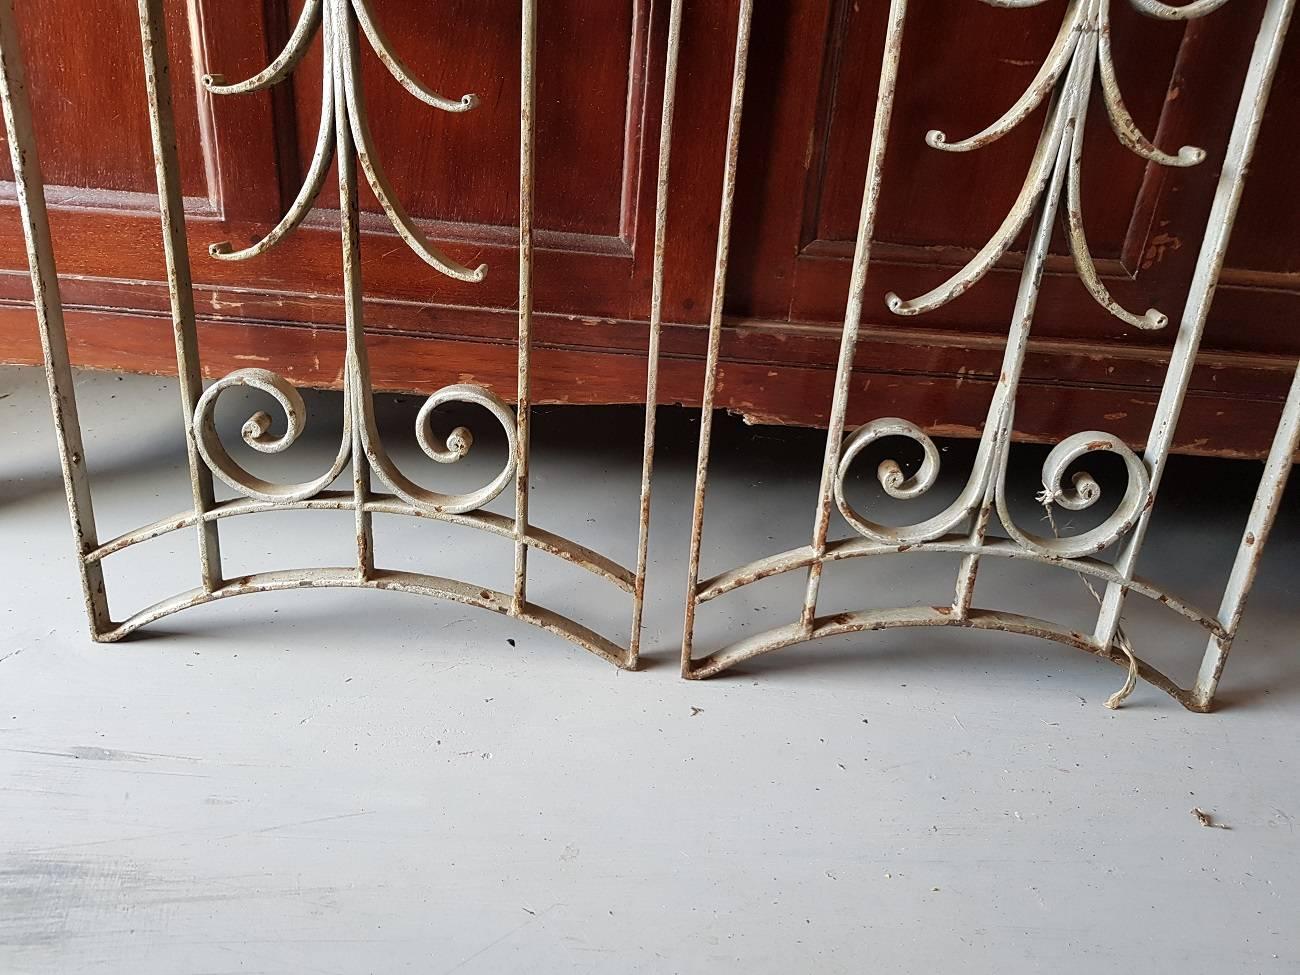 Metal Set of Two Vintage French Door Grills or Fences, Mid-20th Century